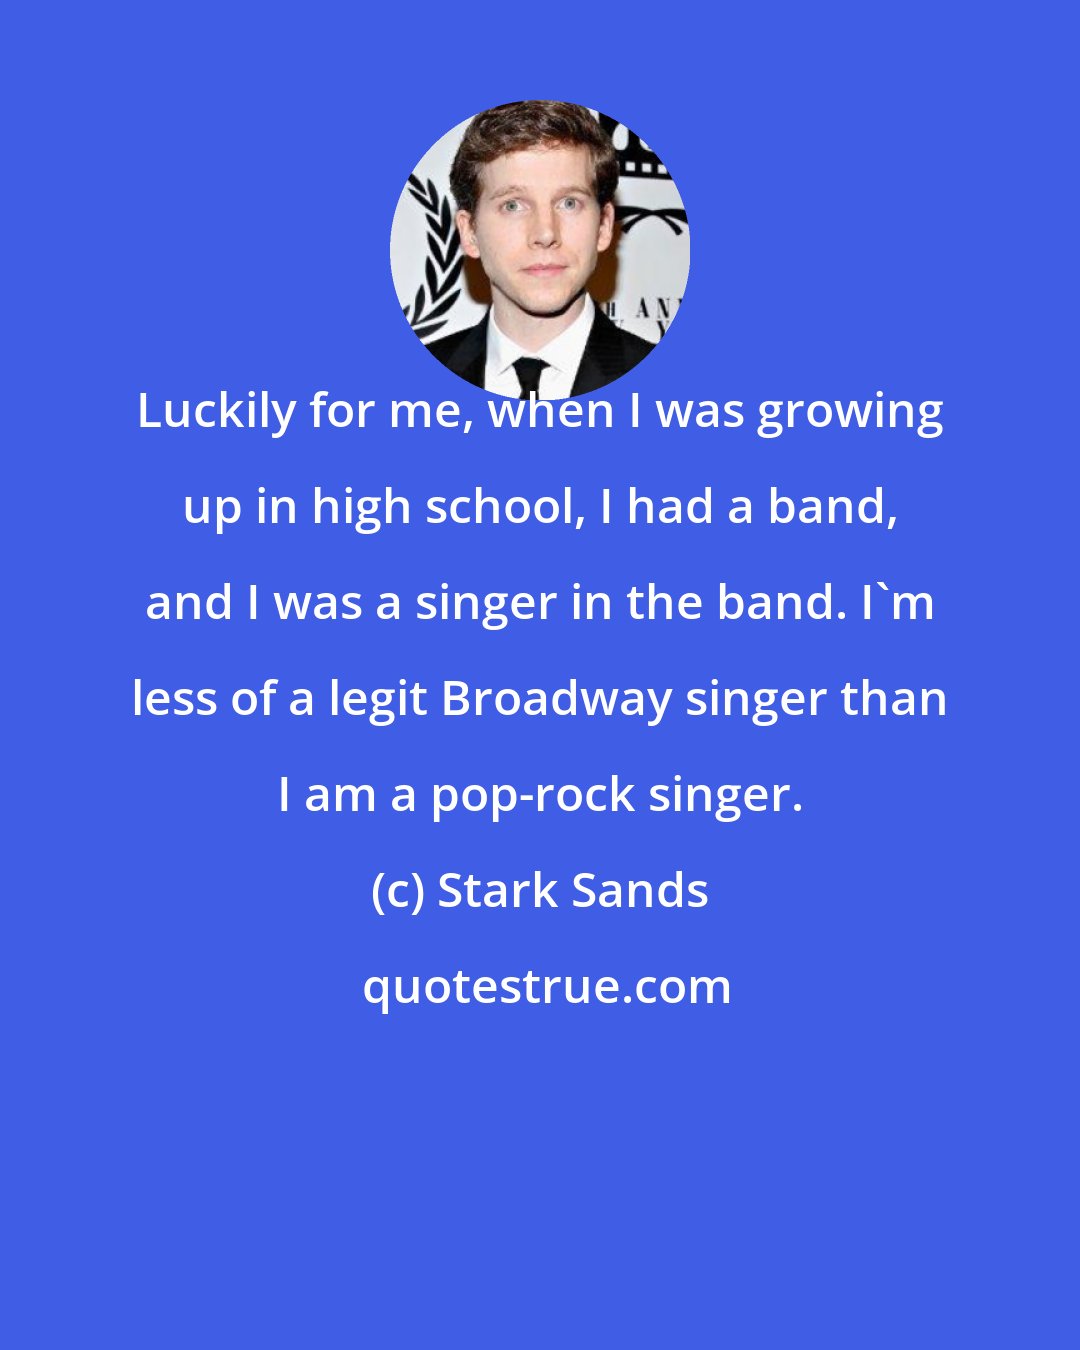 Stark Sands: Luckily for me, when I was growing up in high school, I had a band, and I was a singer in the band. I'm less of a legit Broadway singer than I am a pop-rock singer.